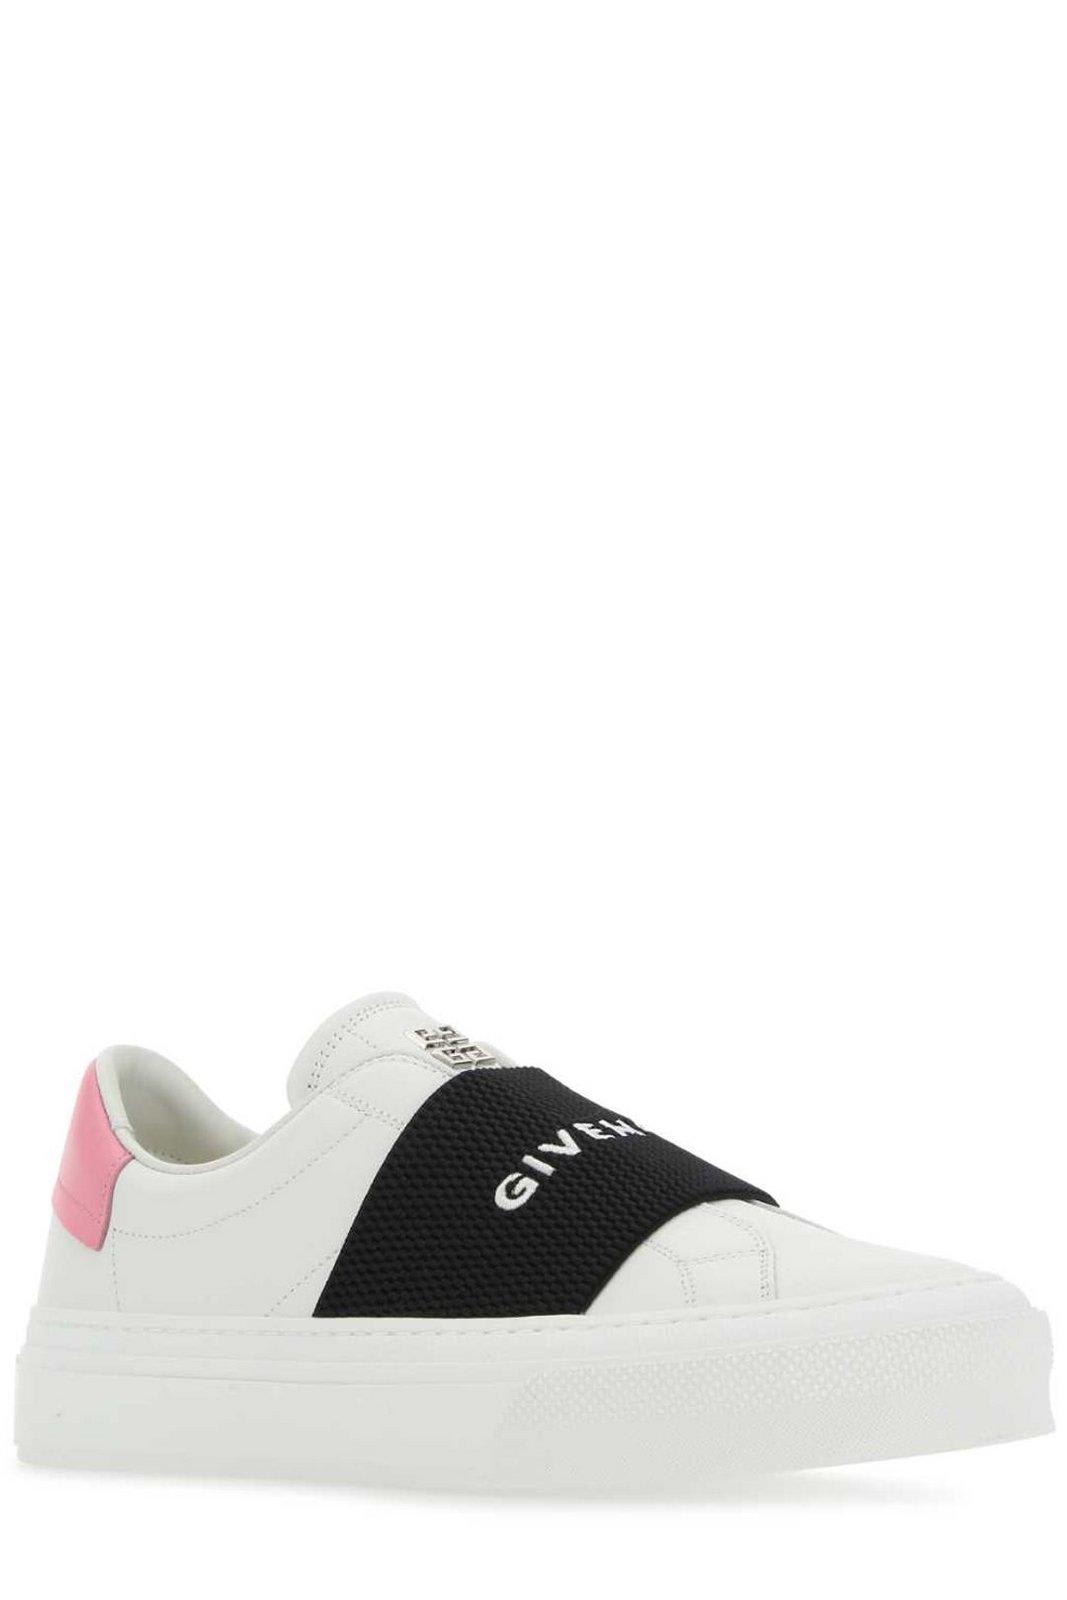 Shop Givenchy City Court Slip-on Sneakers